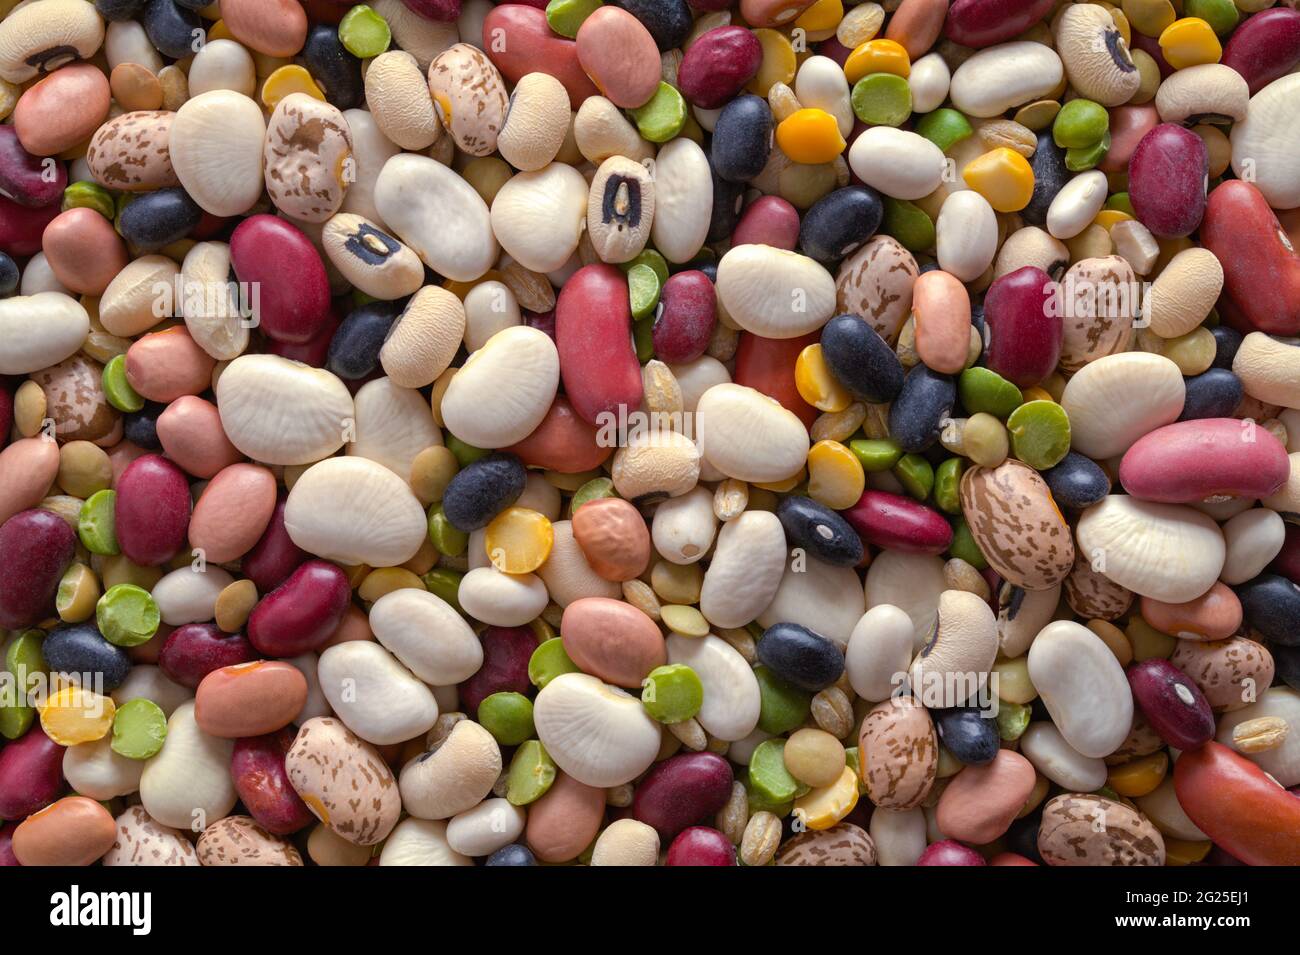 Large Pile of Dry Beans Background Texture. Stock Photo